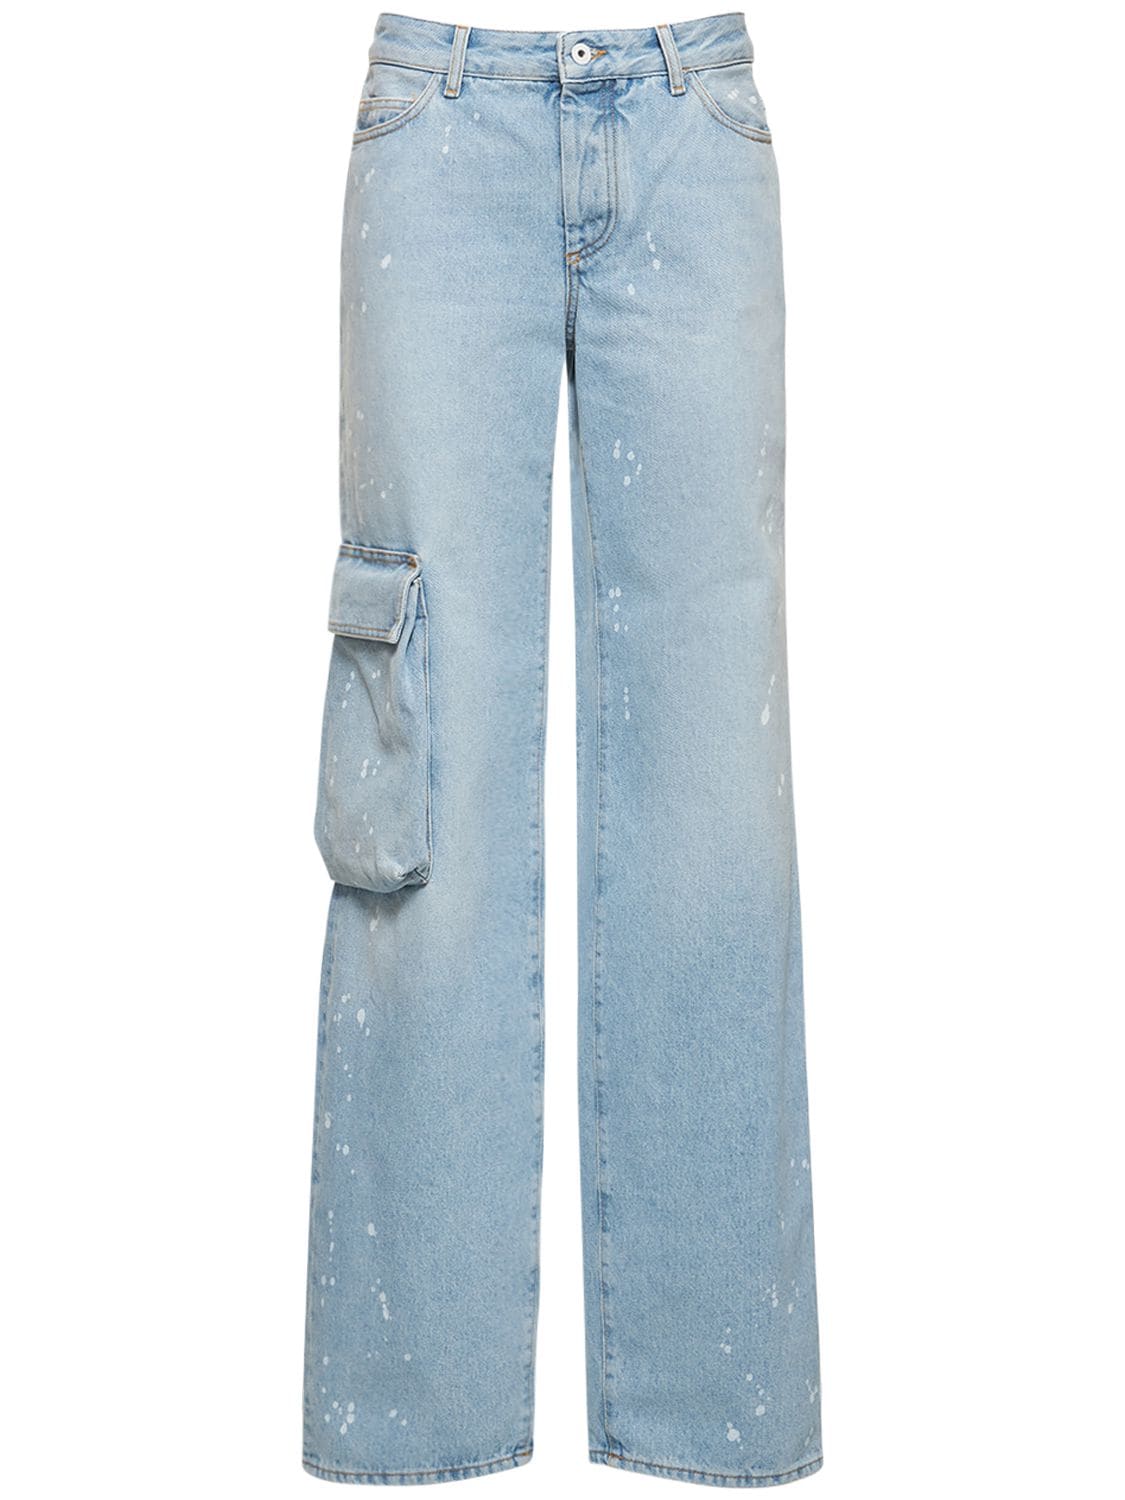 OFF-WHITE TOYBOX PAINTED COTTON DENIM JEANS